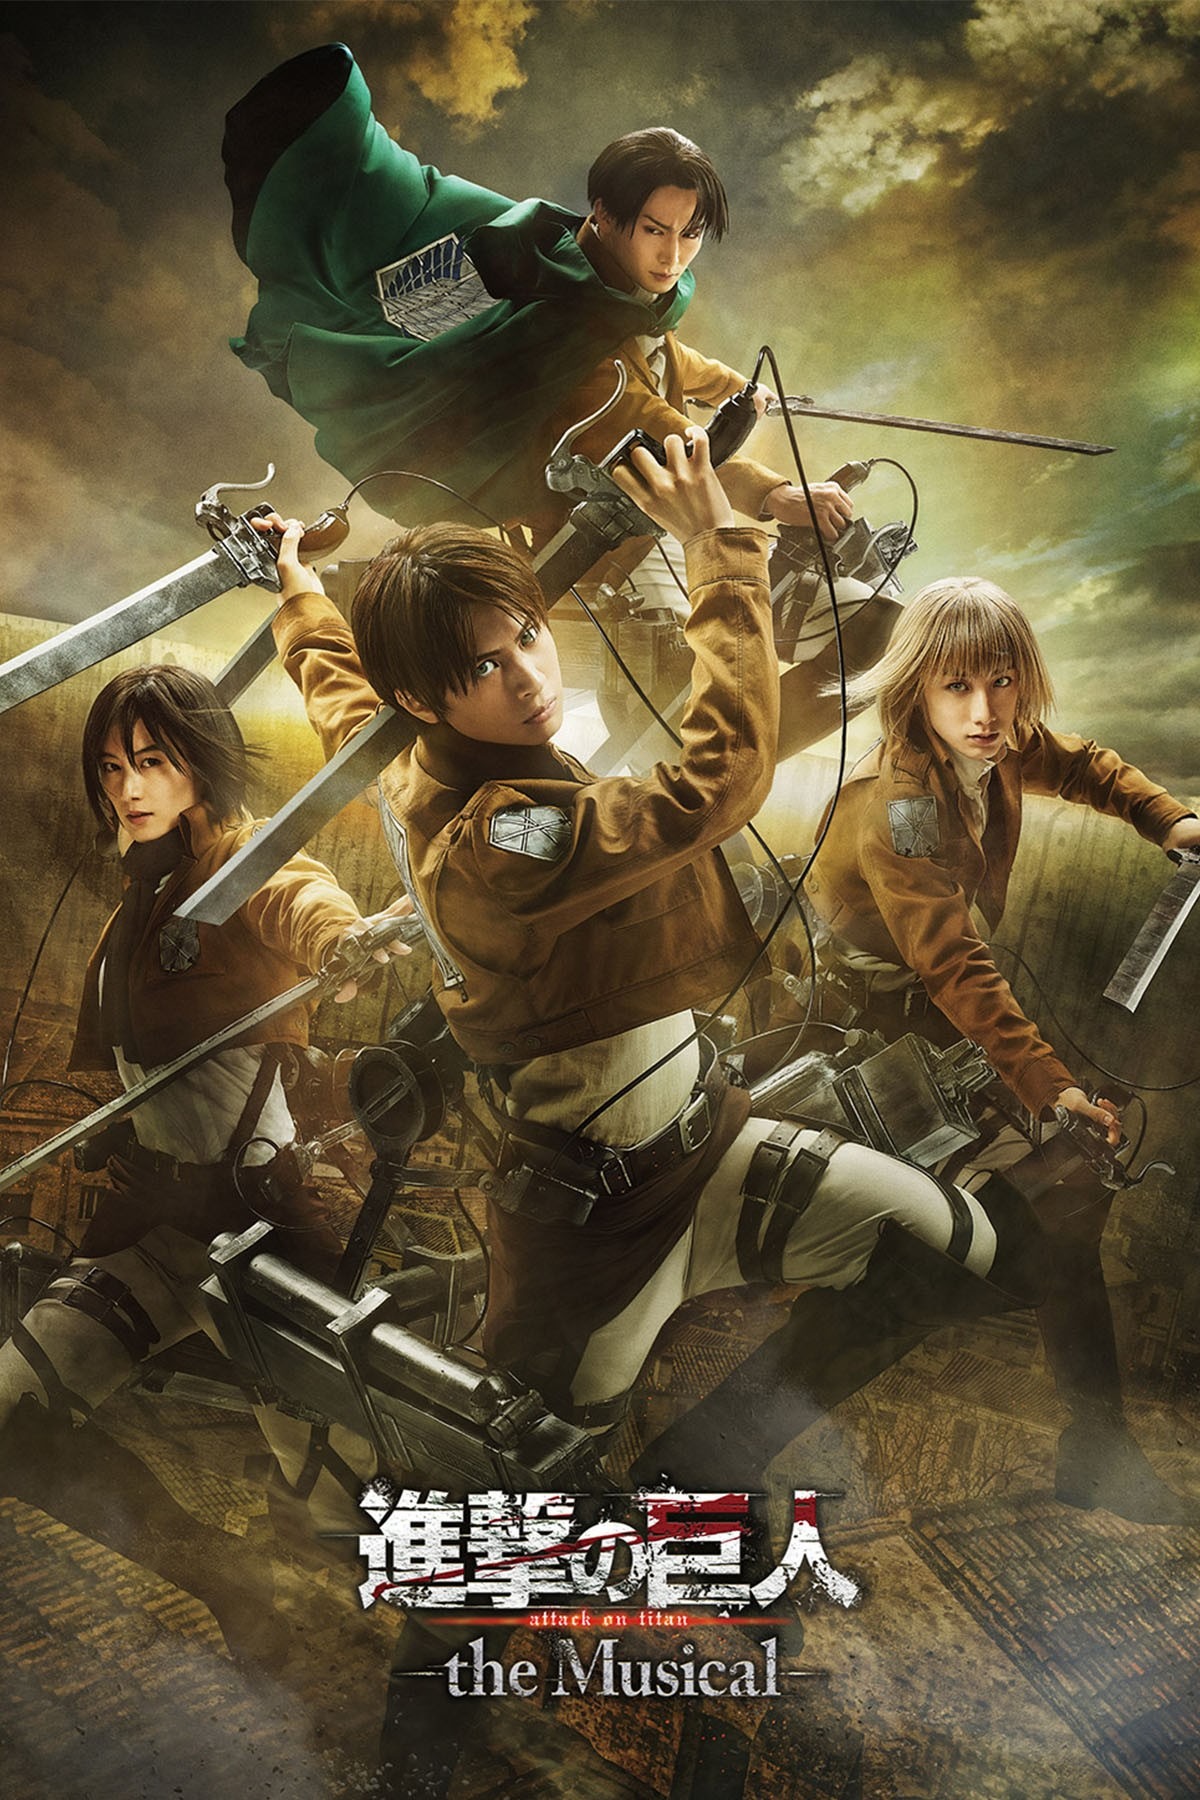 Attack on Titan live action is coming next year!